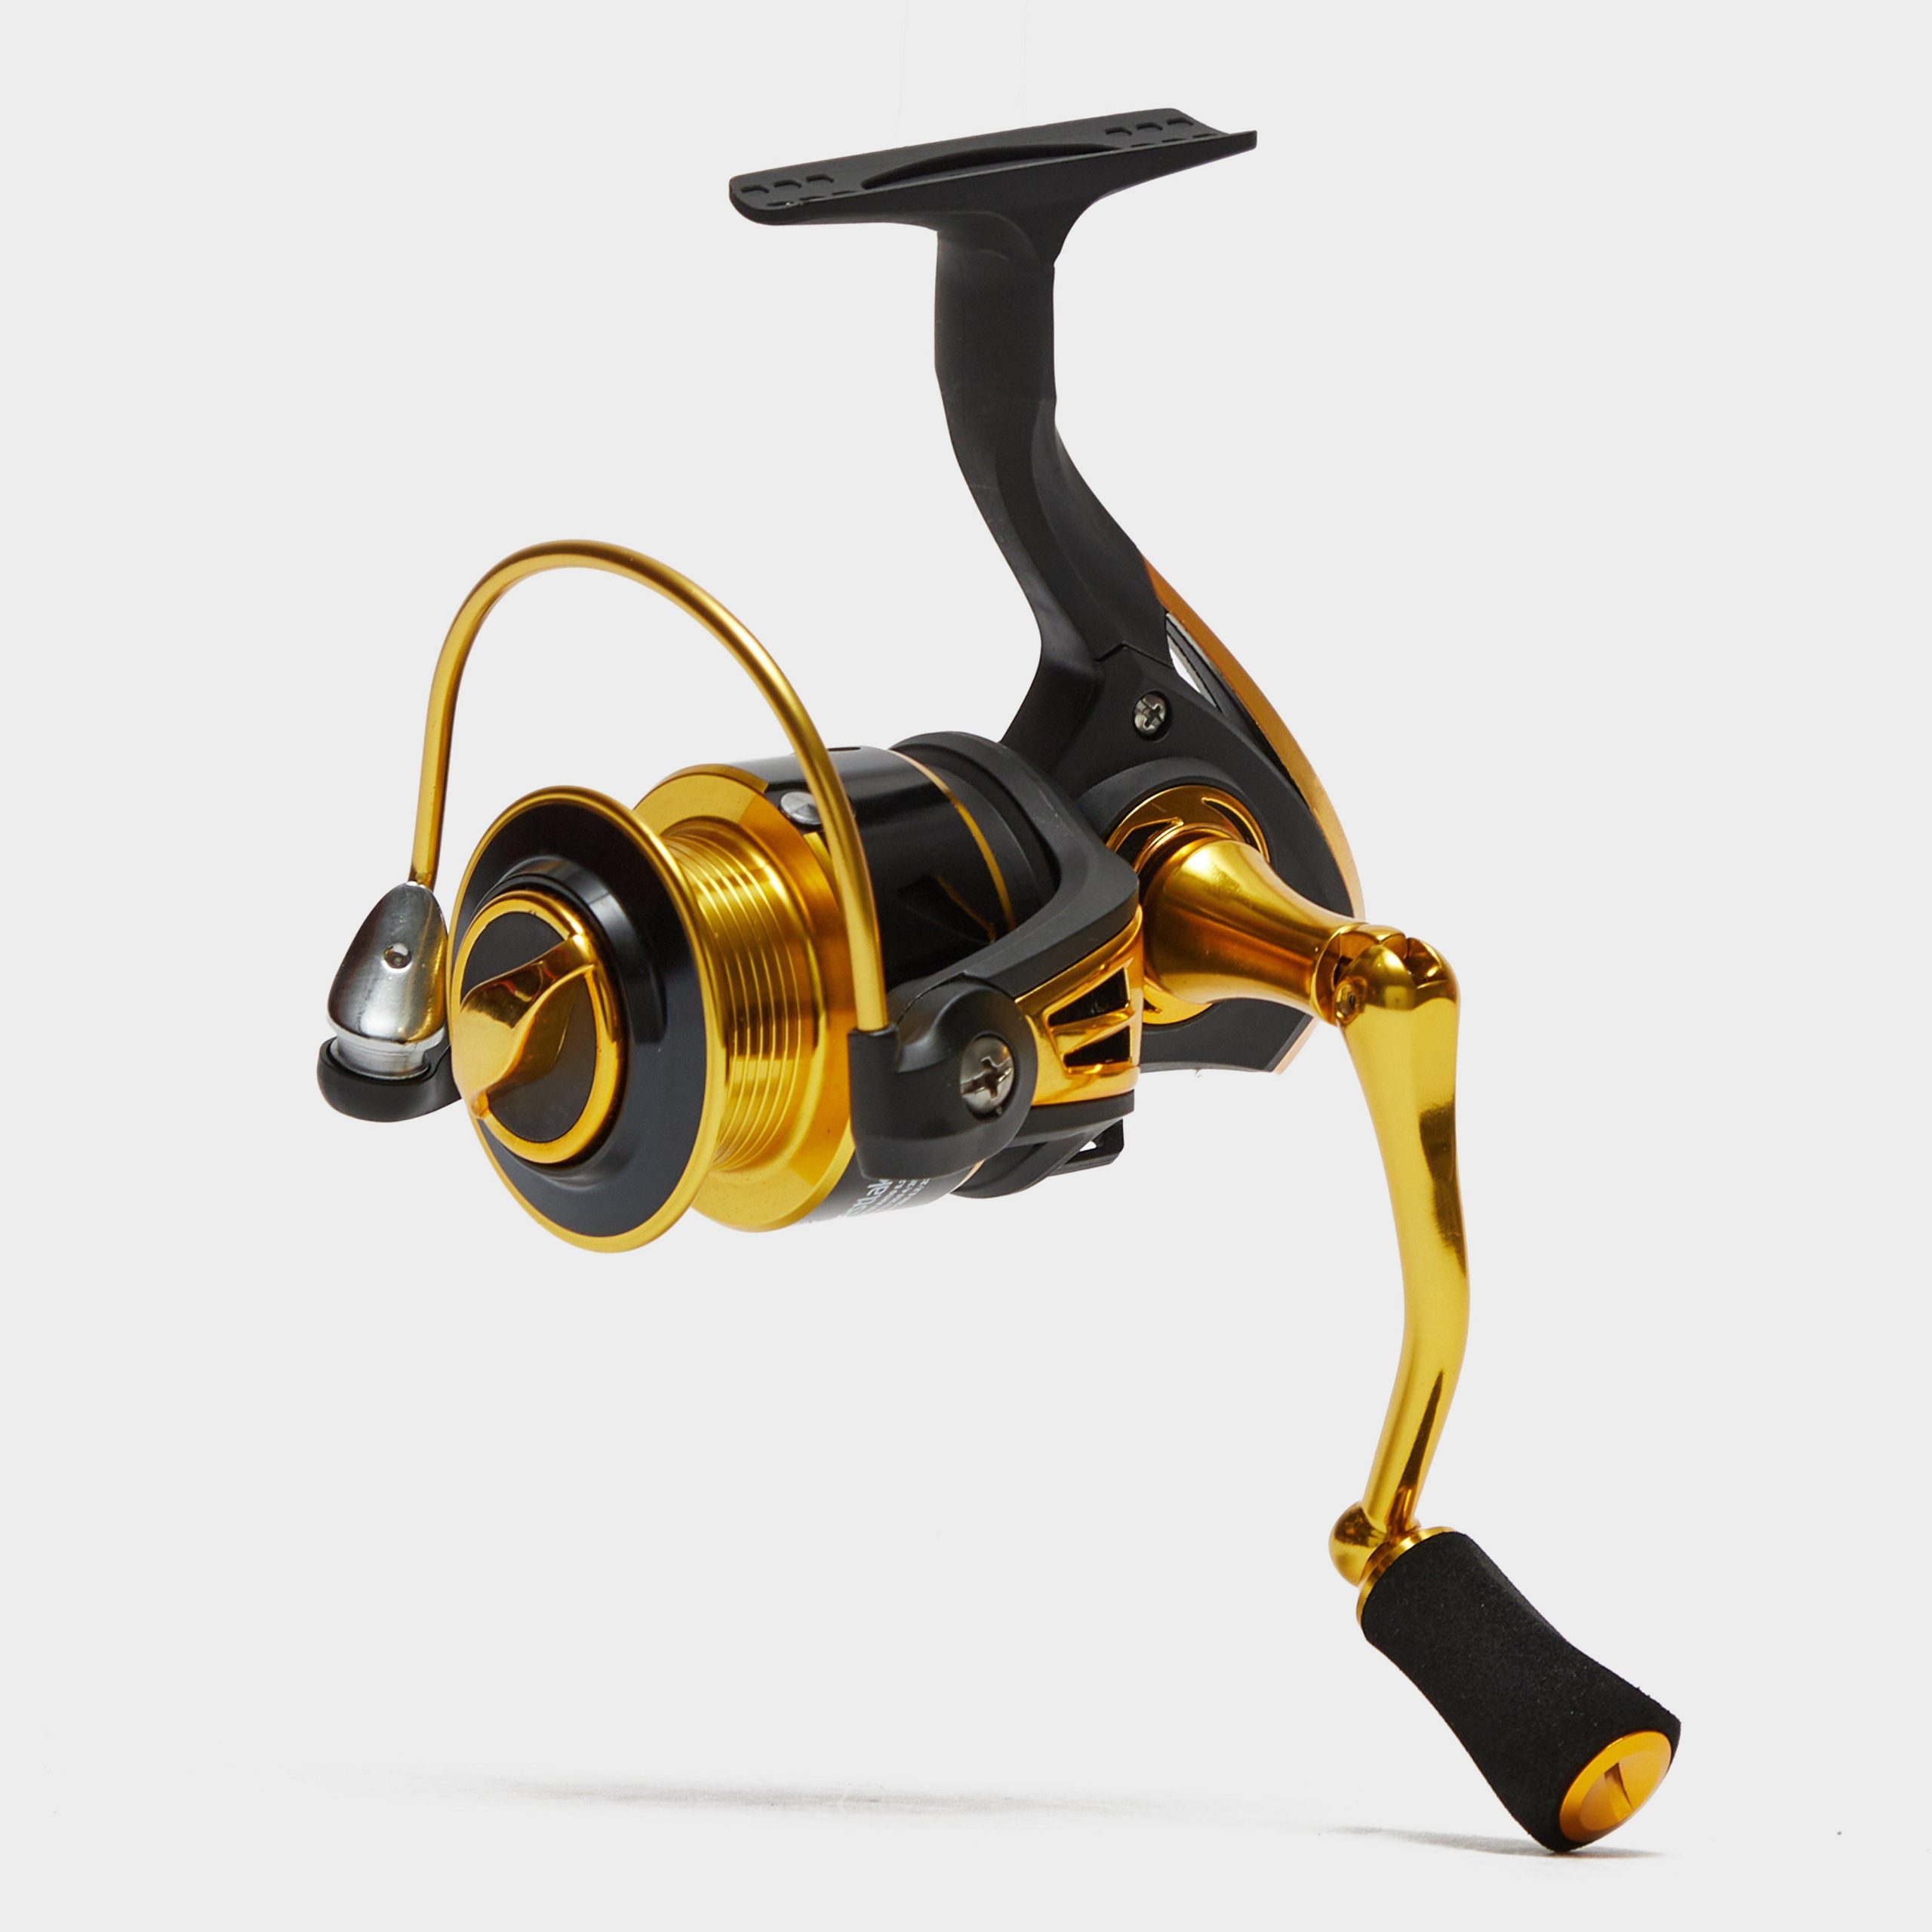 Westlake Official Spinz Reel (RB3000) delivery to United Kingdom free